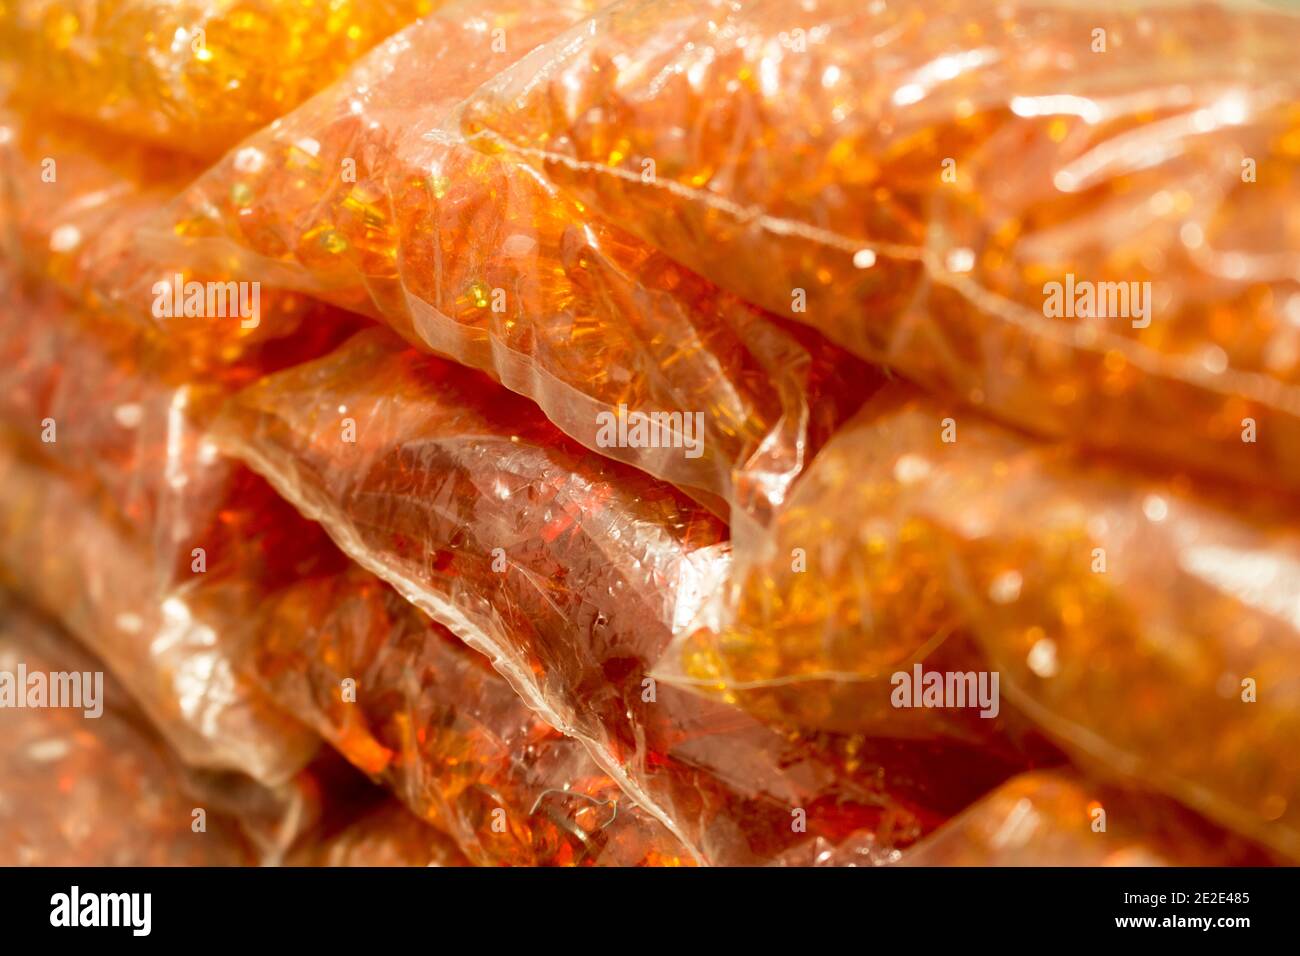 Stacks of orange crystals and pearls packages for bijou Stock Photo